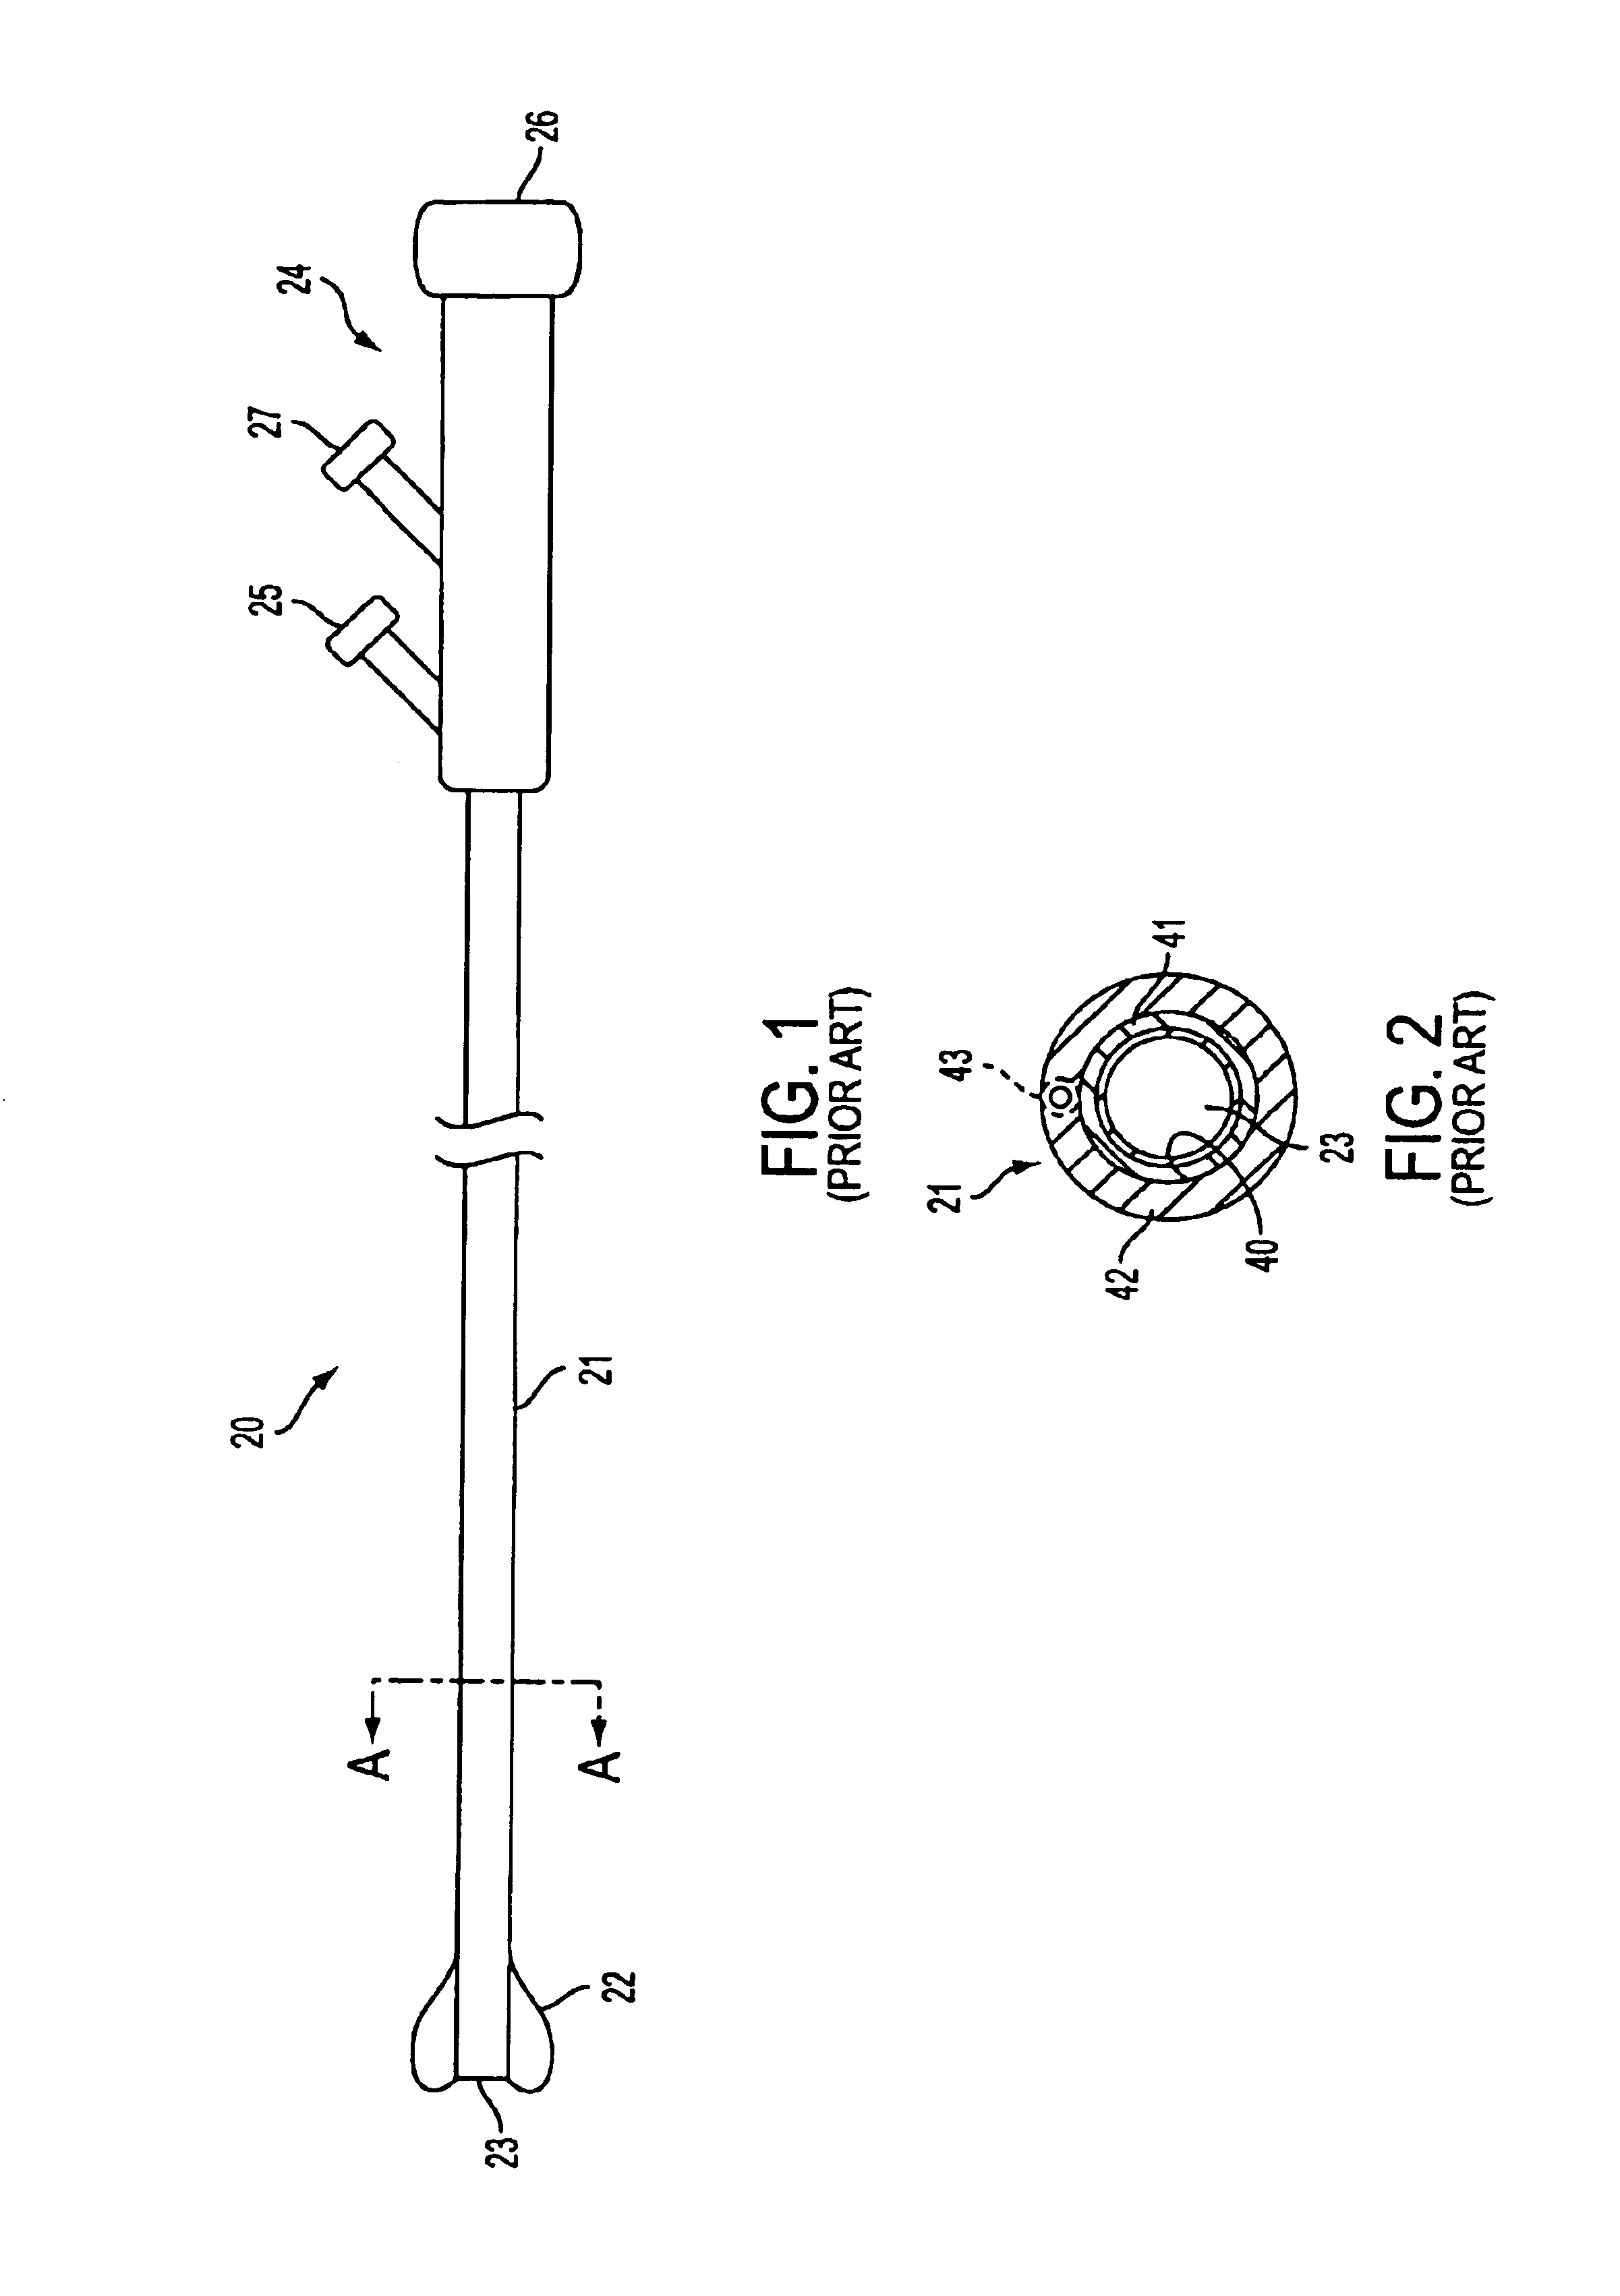 Catheter having a compliant member configured to regulate aspiration rates